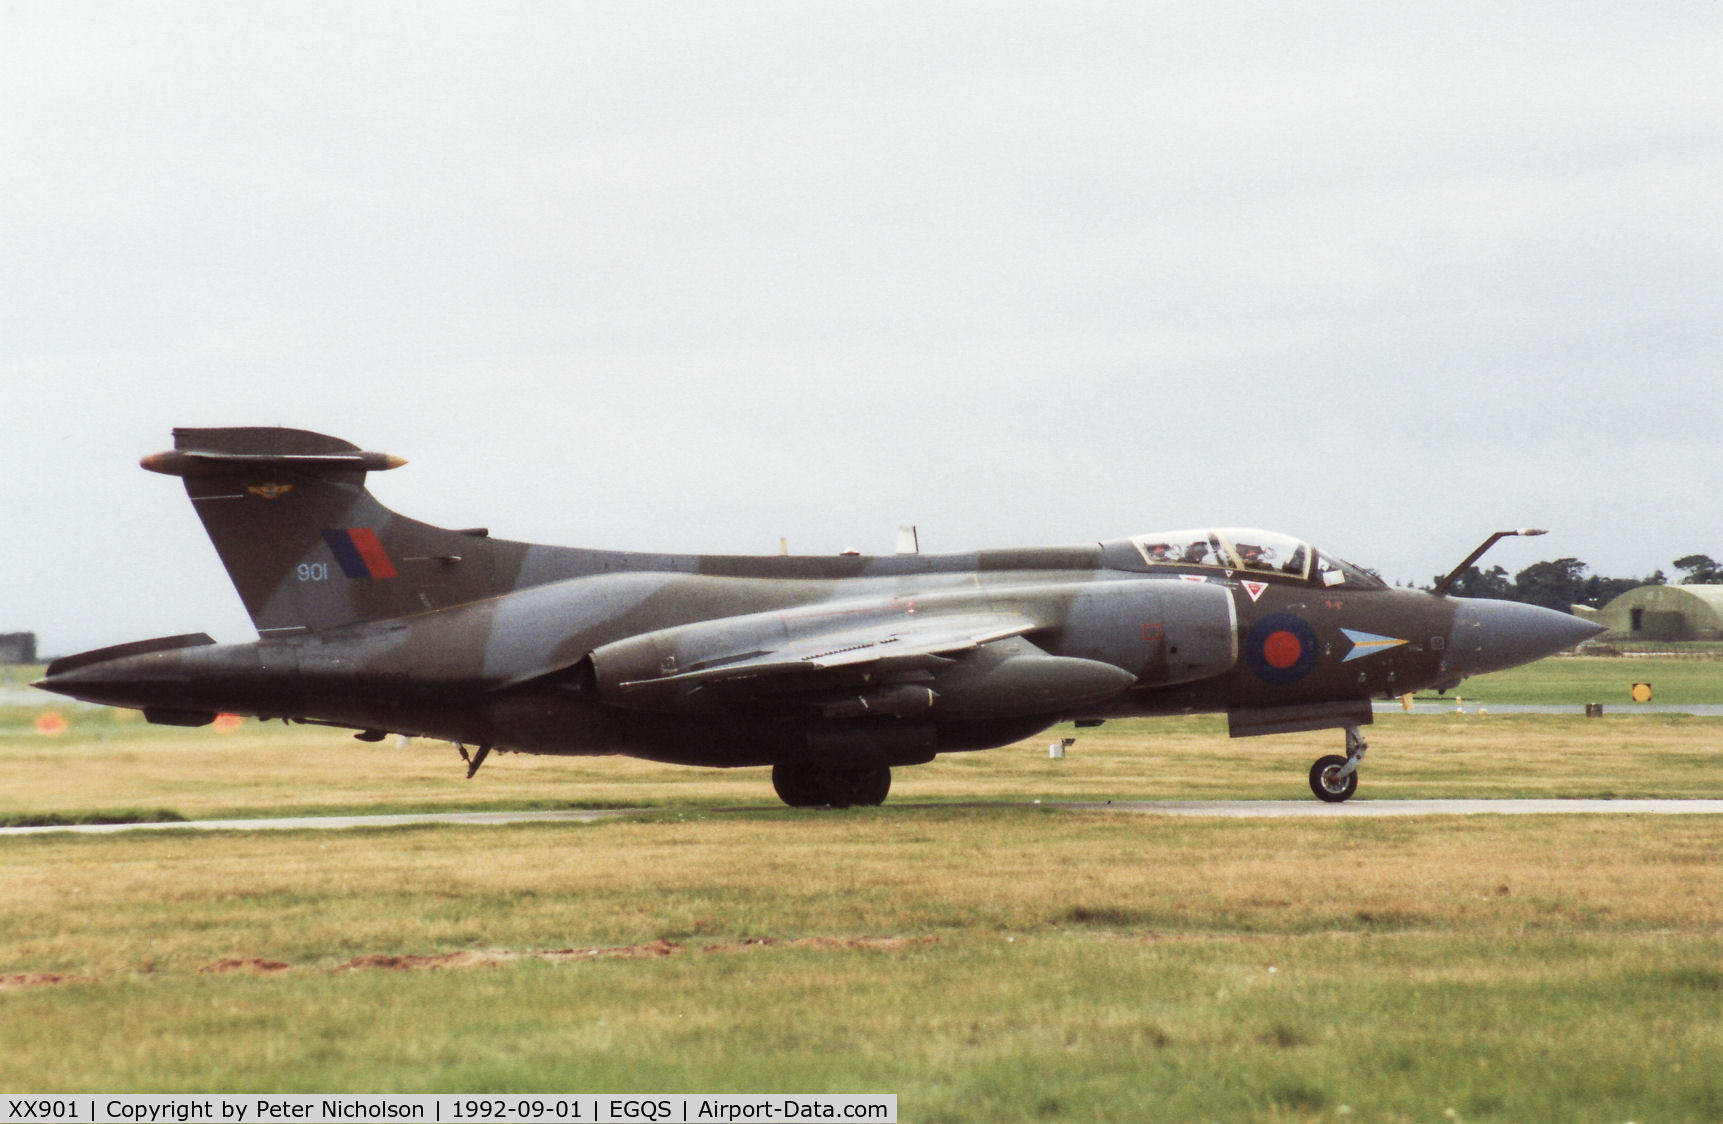 XX901, 1977 Hawker Siddeley Buccaneer S.2B C/N B3-06-75, Buccaneer S.2B of 208 Squadron awaiting clearance to join the active runway at RAF Lossiemouth in September 1992.